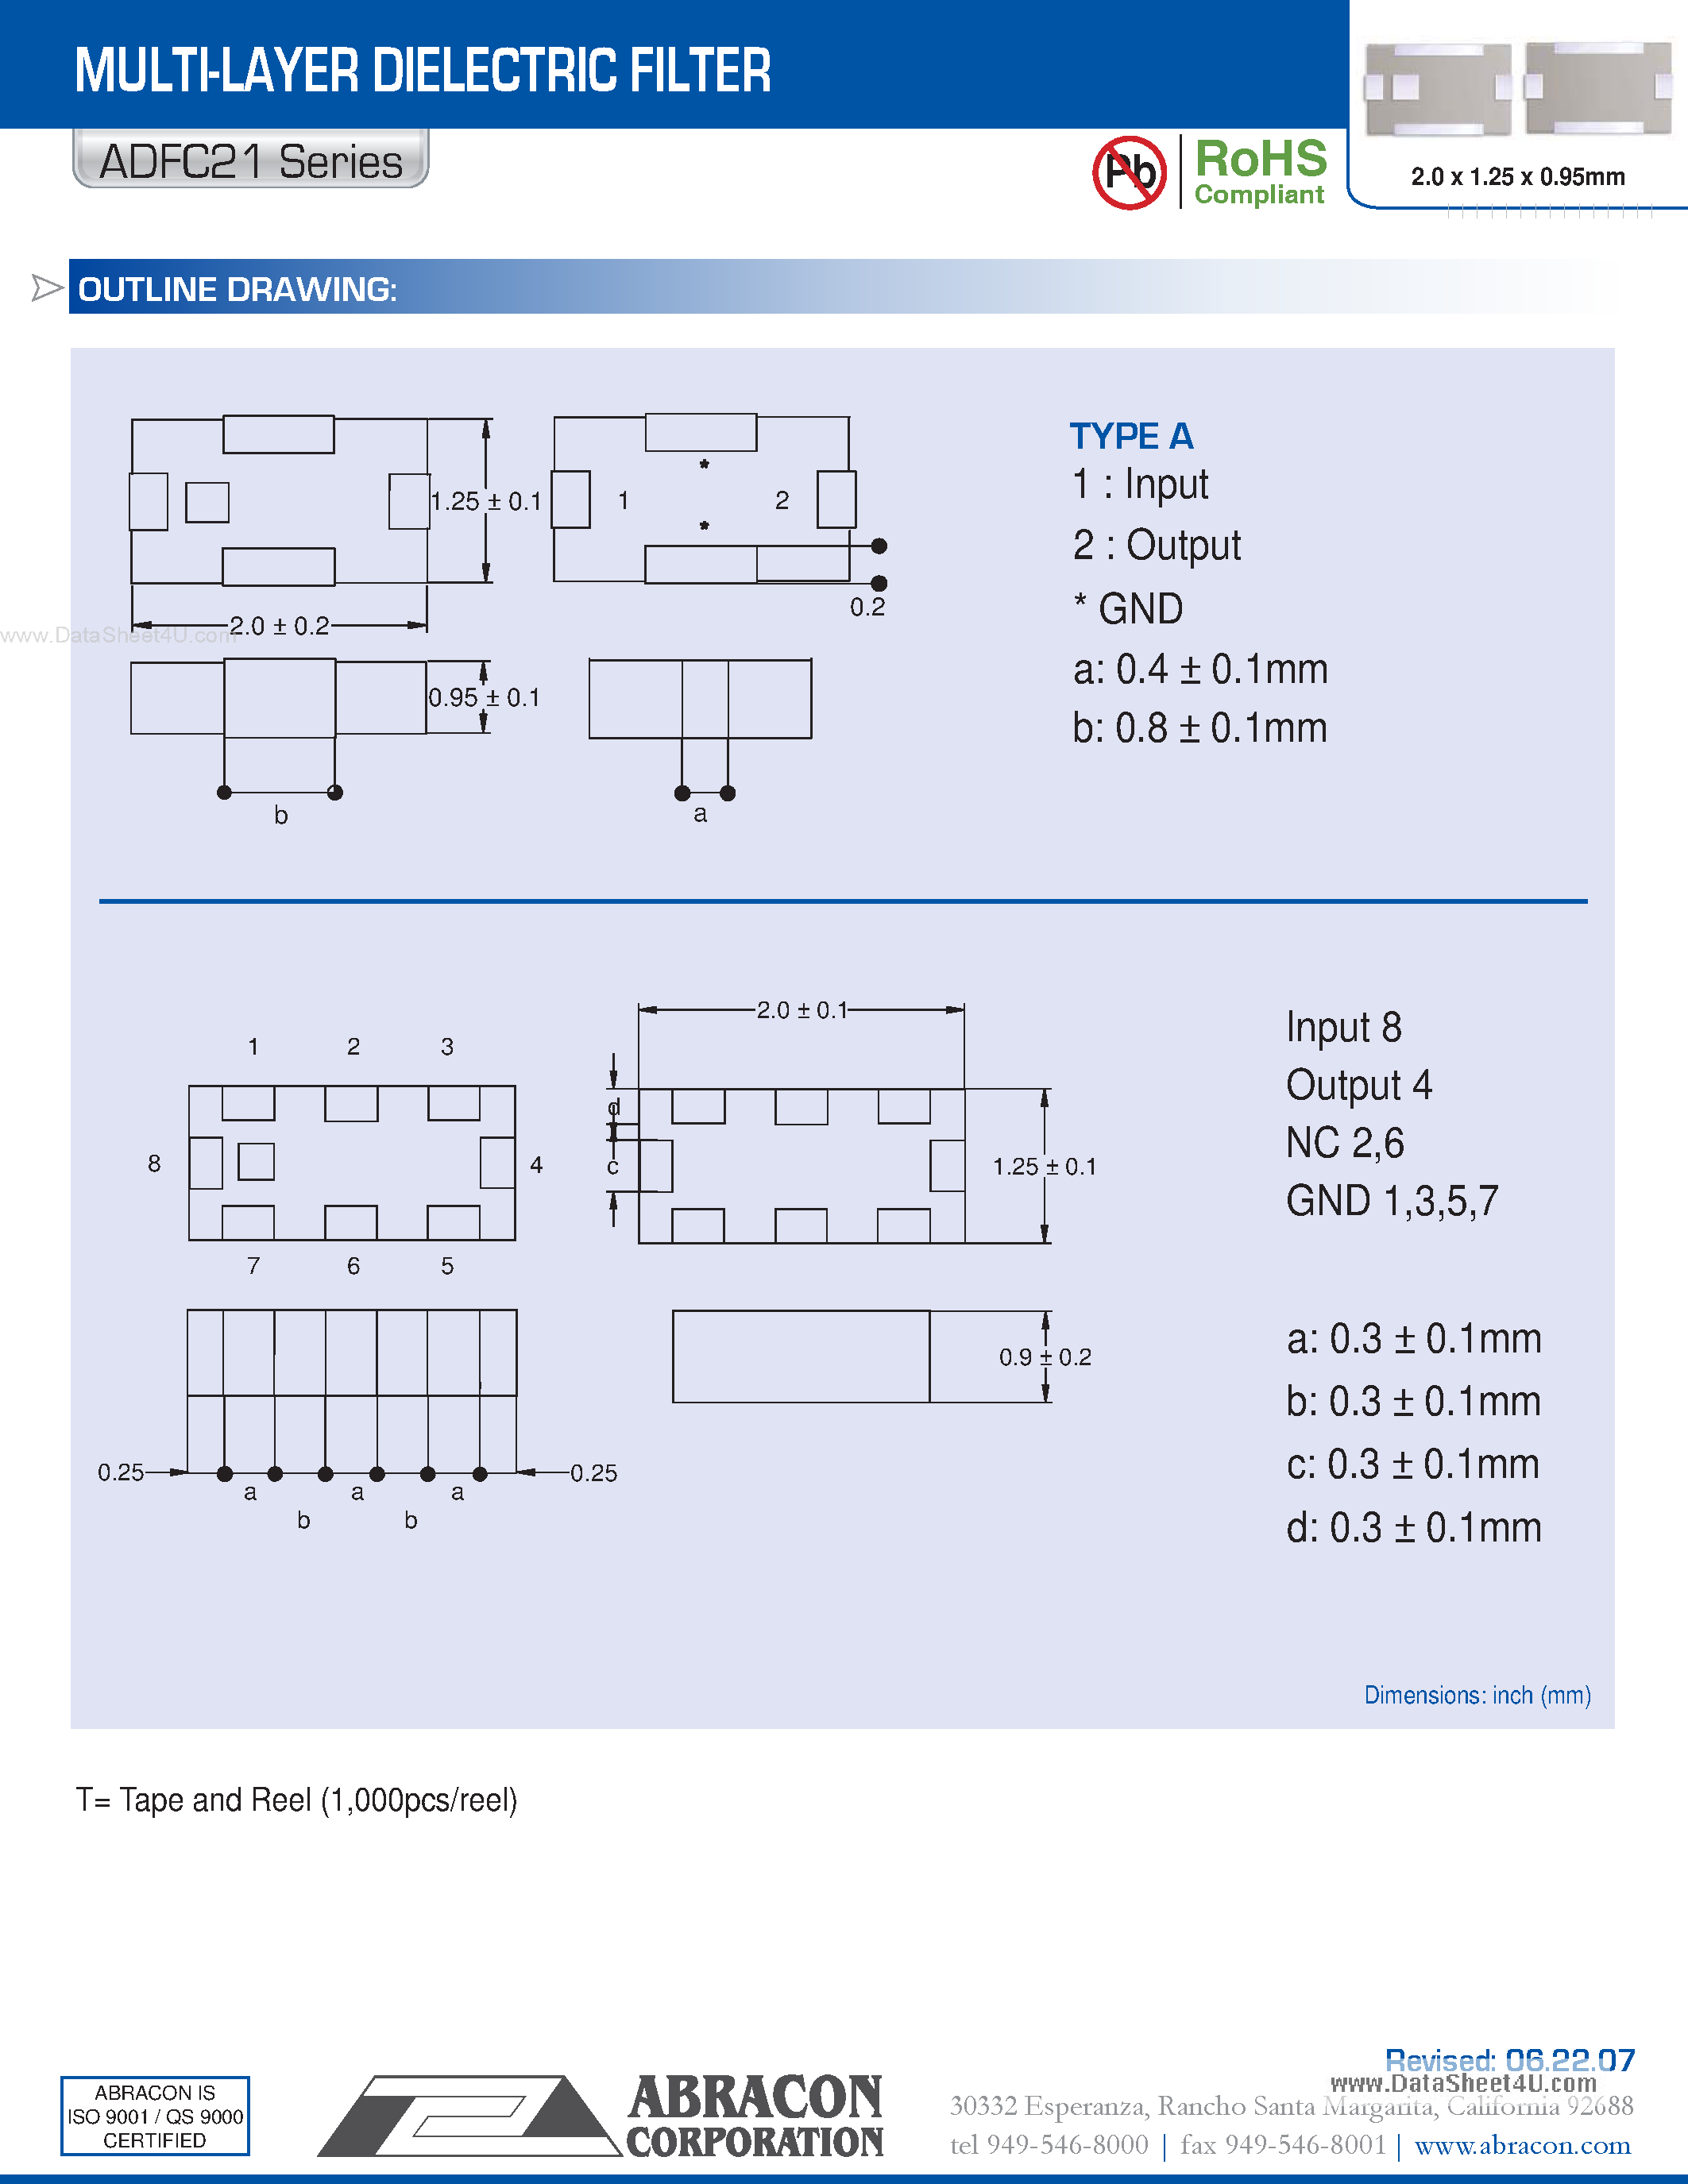 Datasheet ADFC21 - MULTI-LAYER DIELECTRIC FILTER page 2